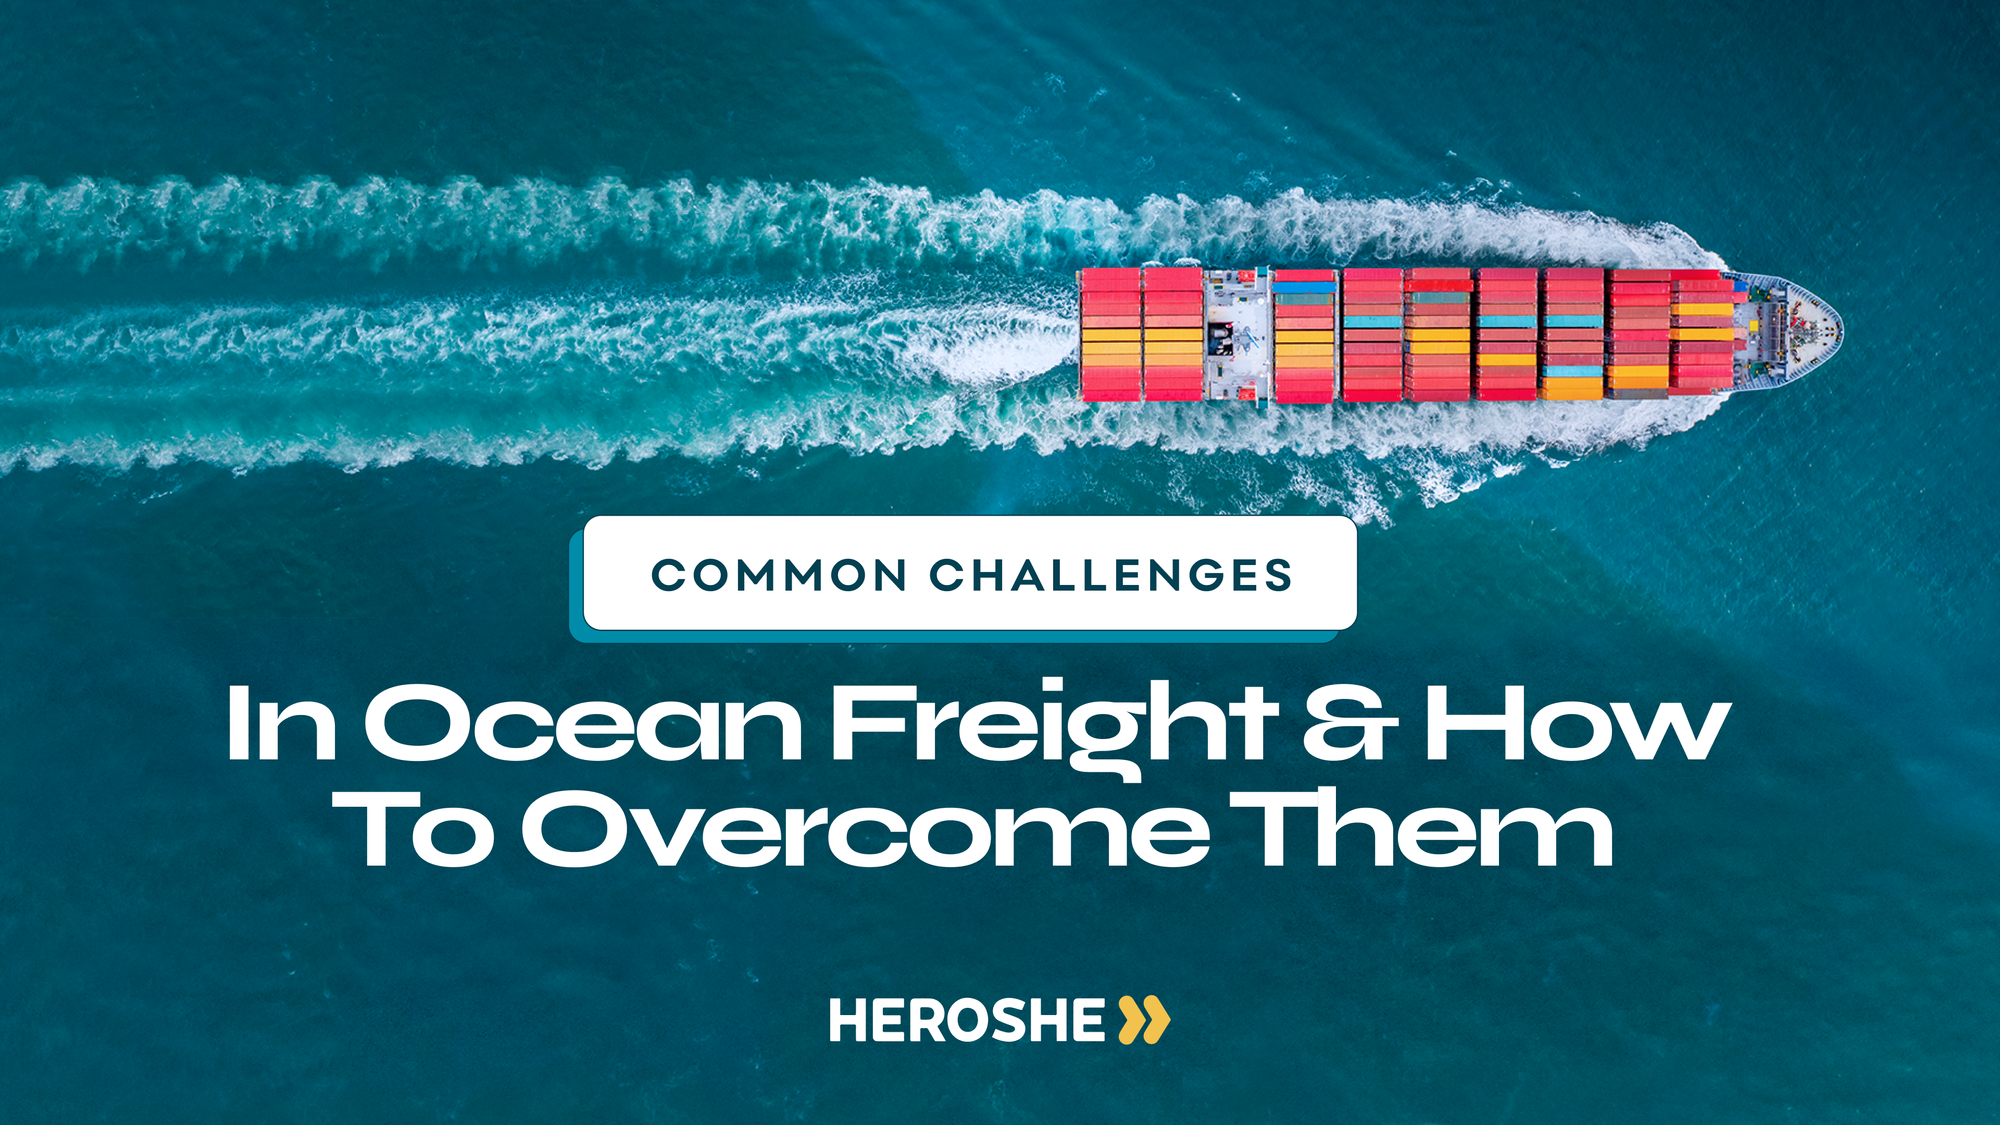 Common Challenges in Ocean Shipping and How to Overcome Them